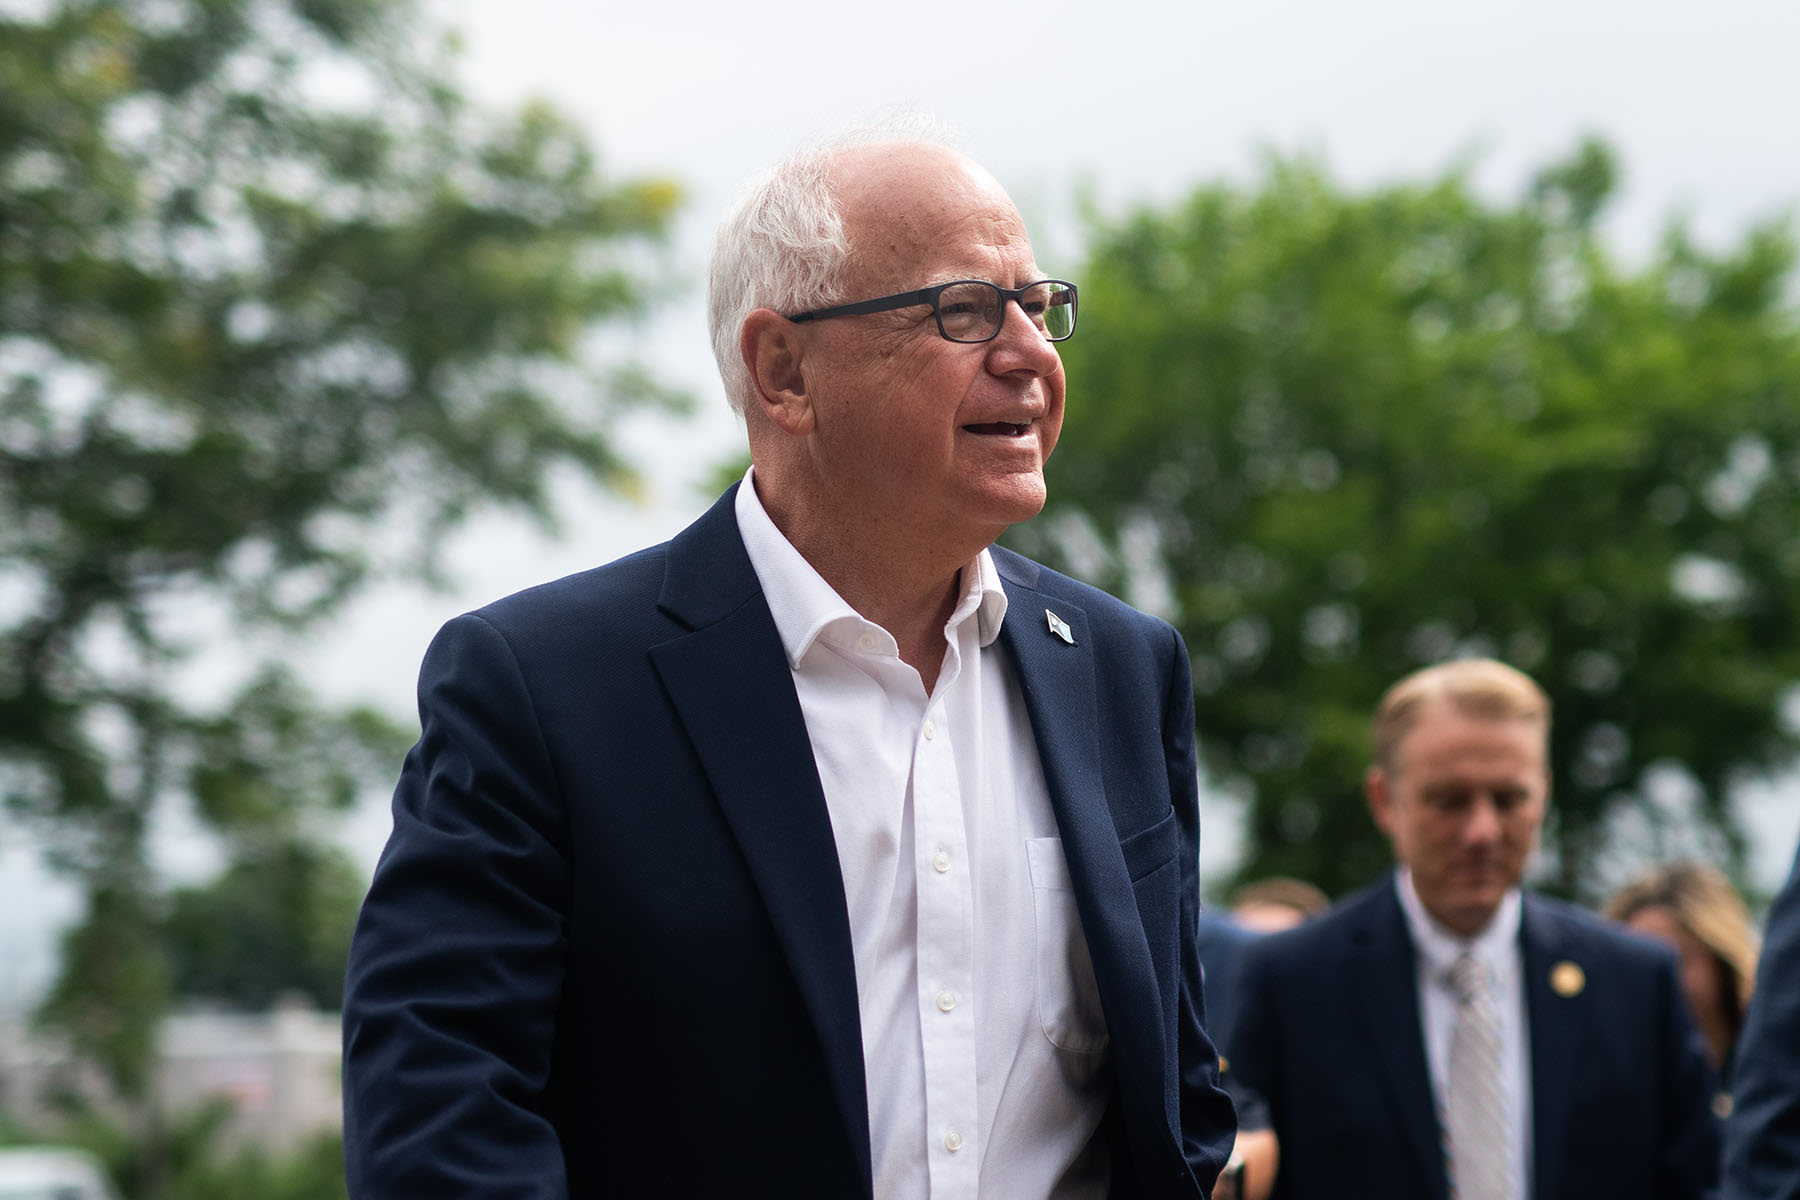 Tim Walz Isn’t So Nice When It Comes to Exposing Trump and the GOP